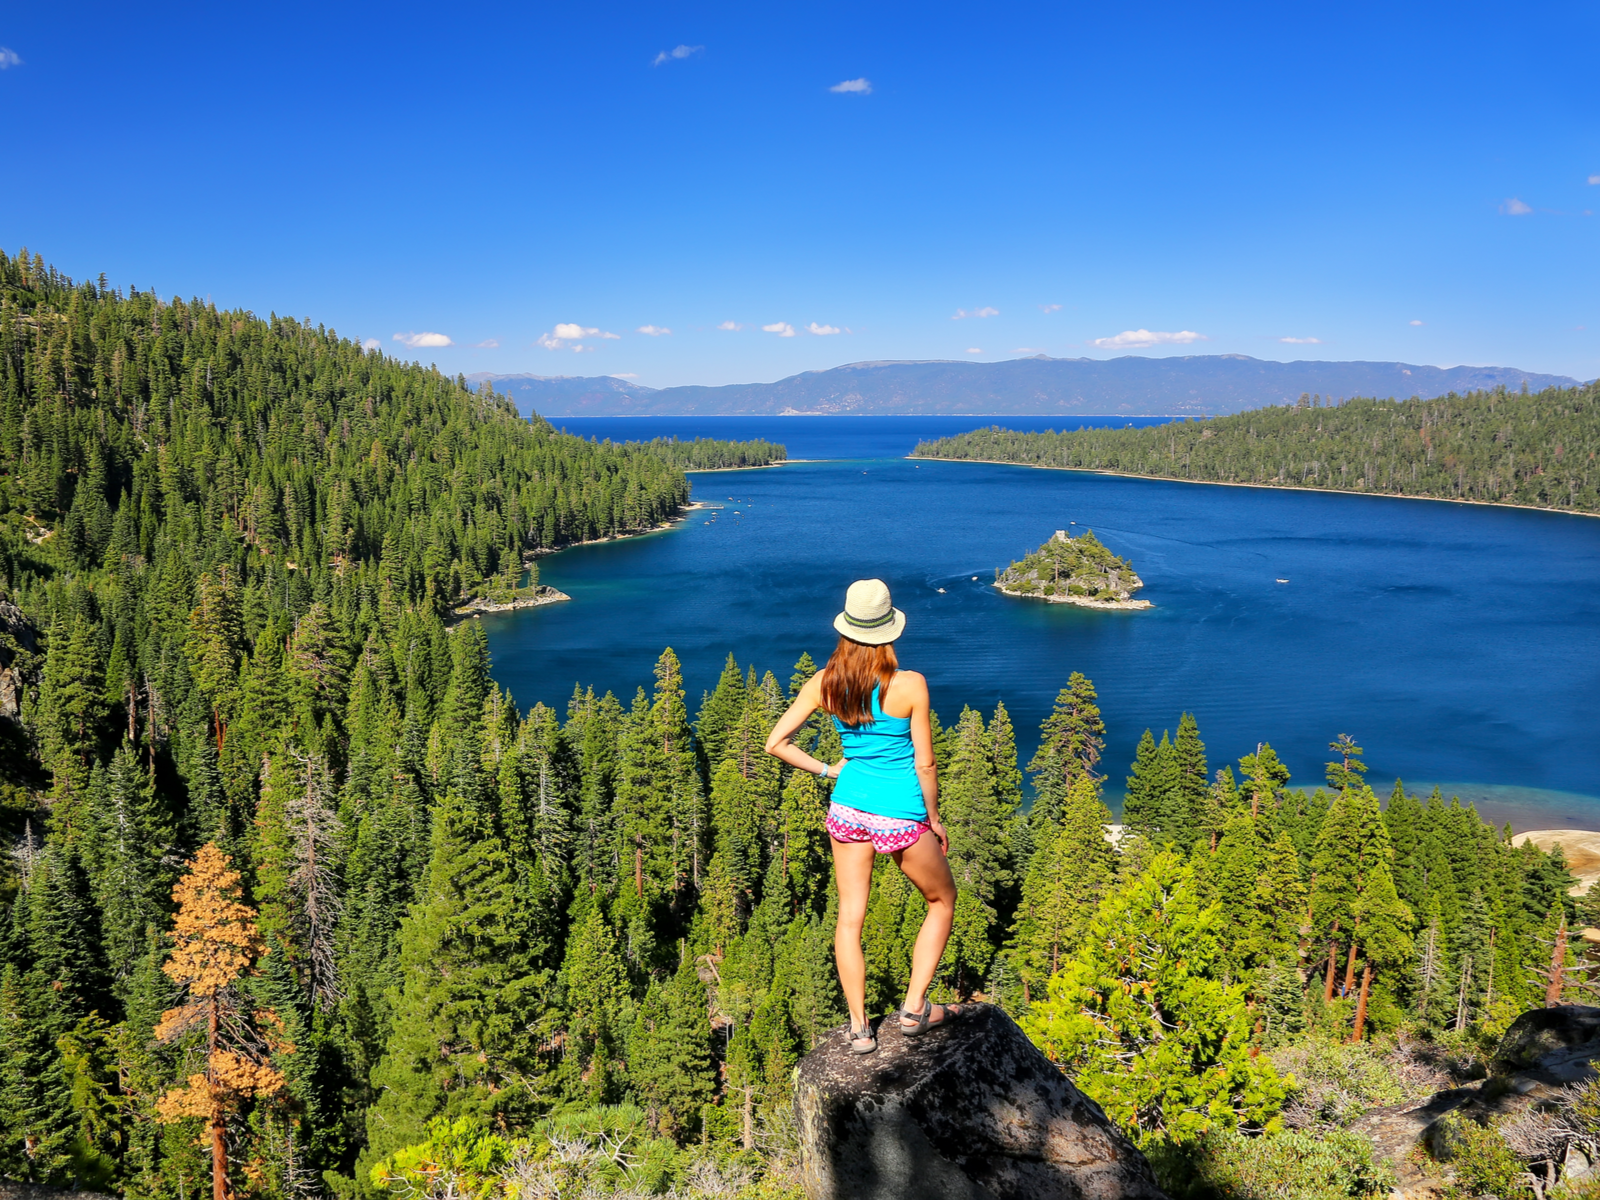 A young woman on her sun hat standing on rock overlooking the lush pine tree forest and peaceful Emerald Bay at Lake Tahoe in California and Nevada, one of the best lakes in the U.S.